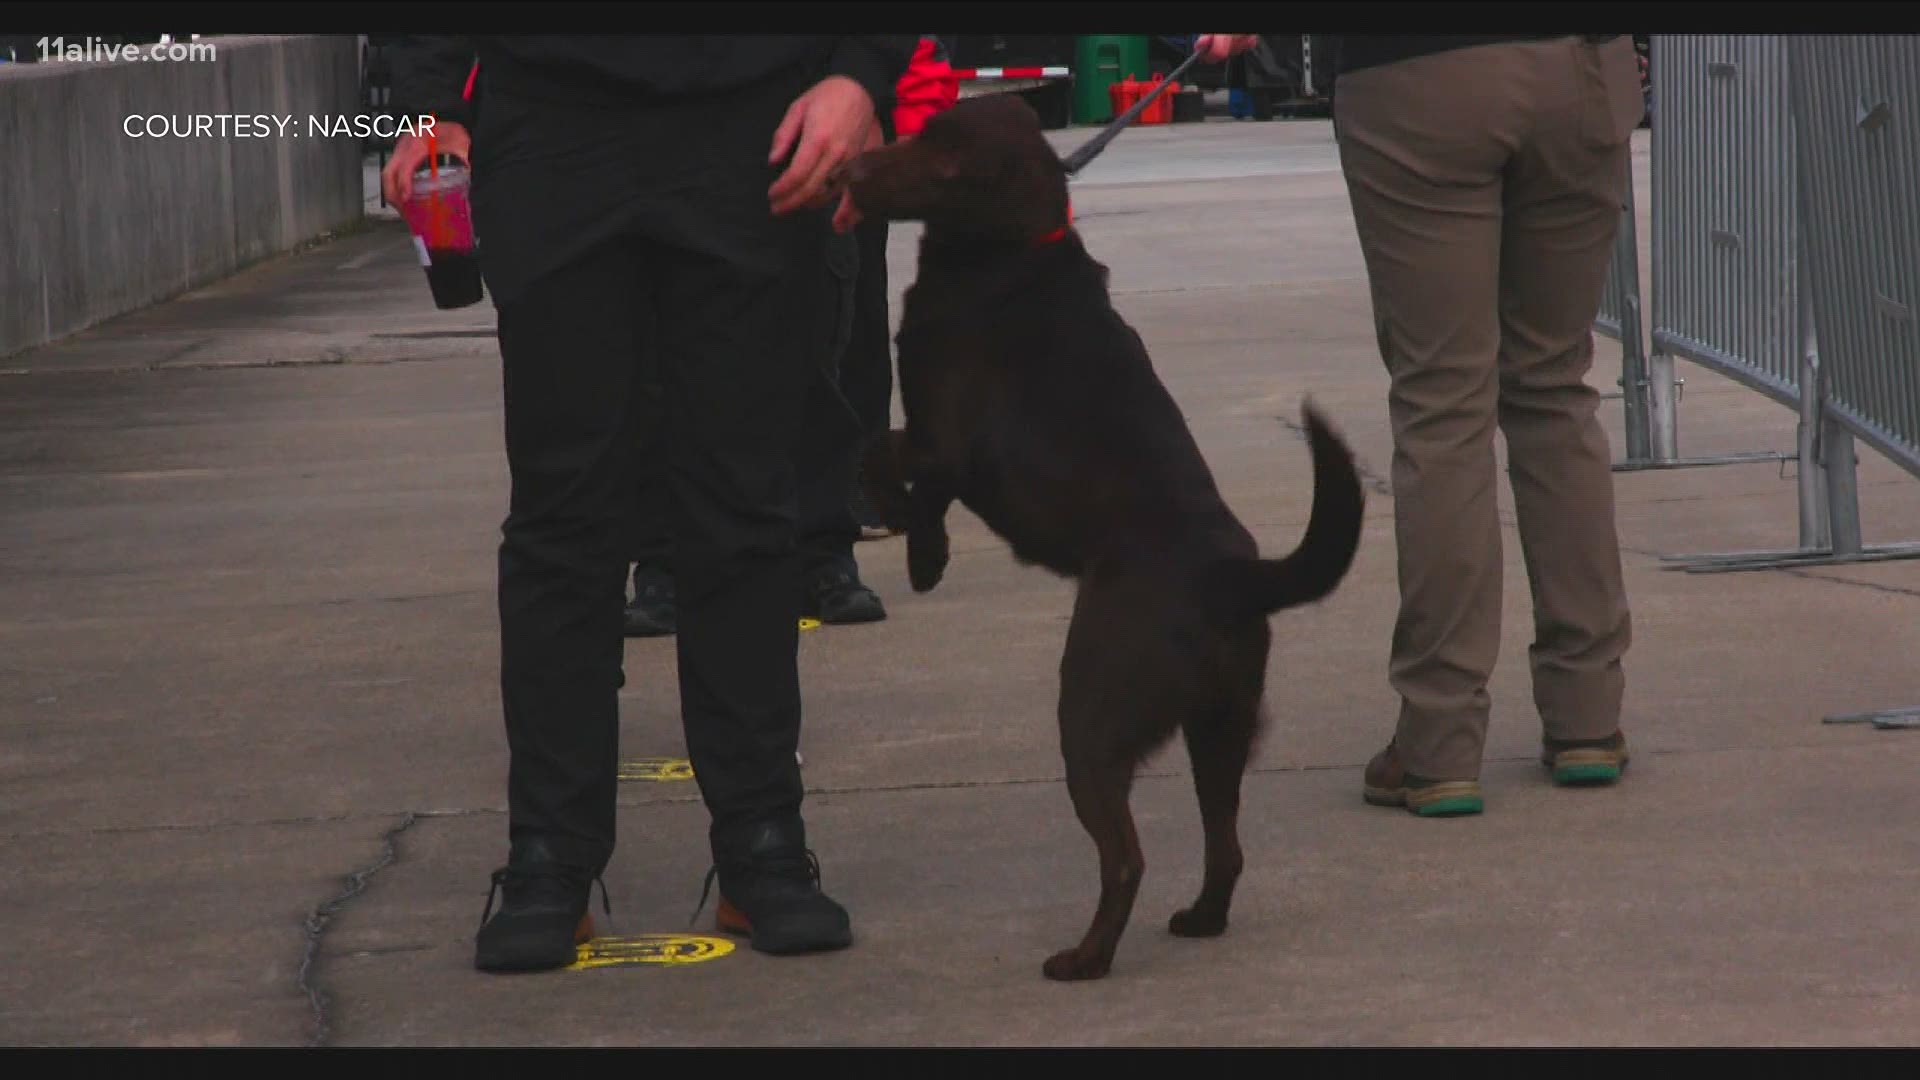 COVID sniffing dogs were tested out on some essential personnel but not regular fans, officials said.